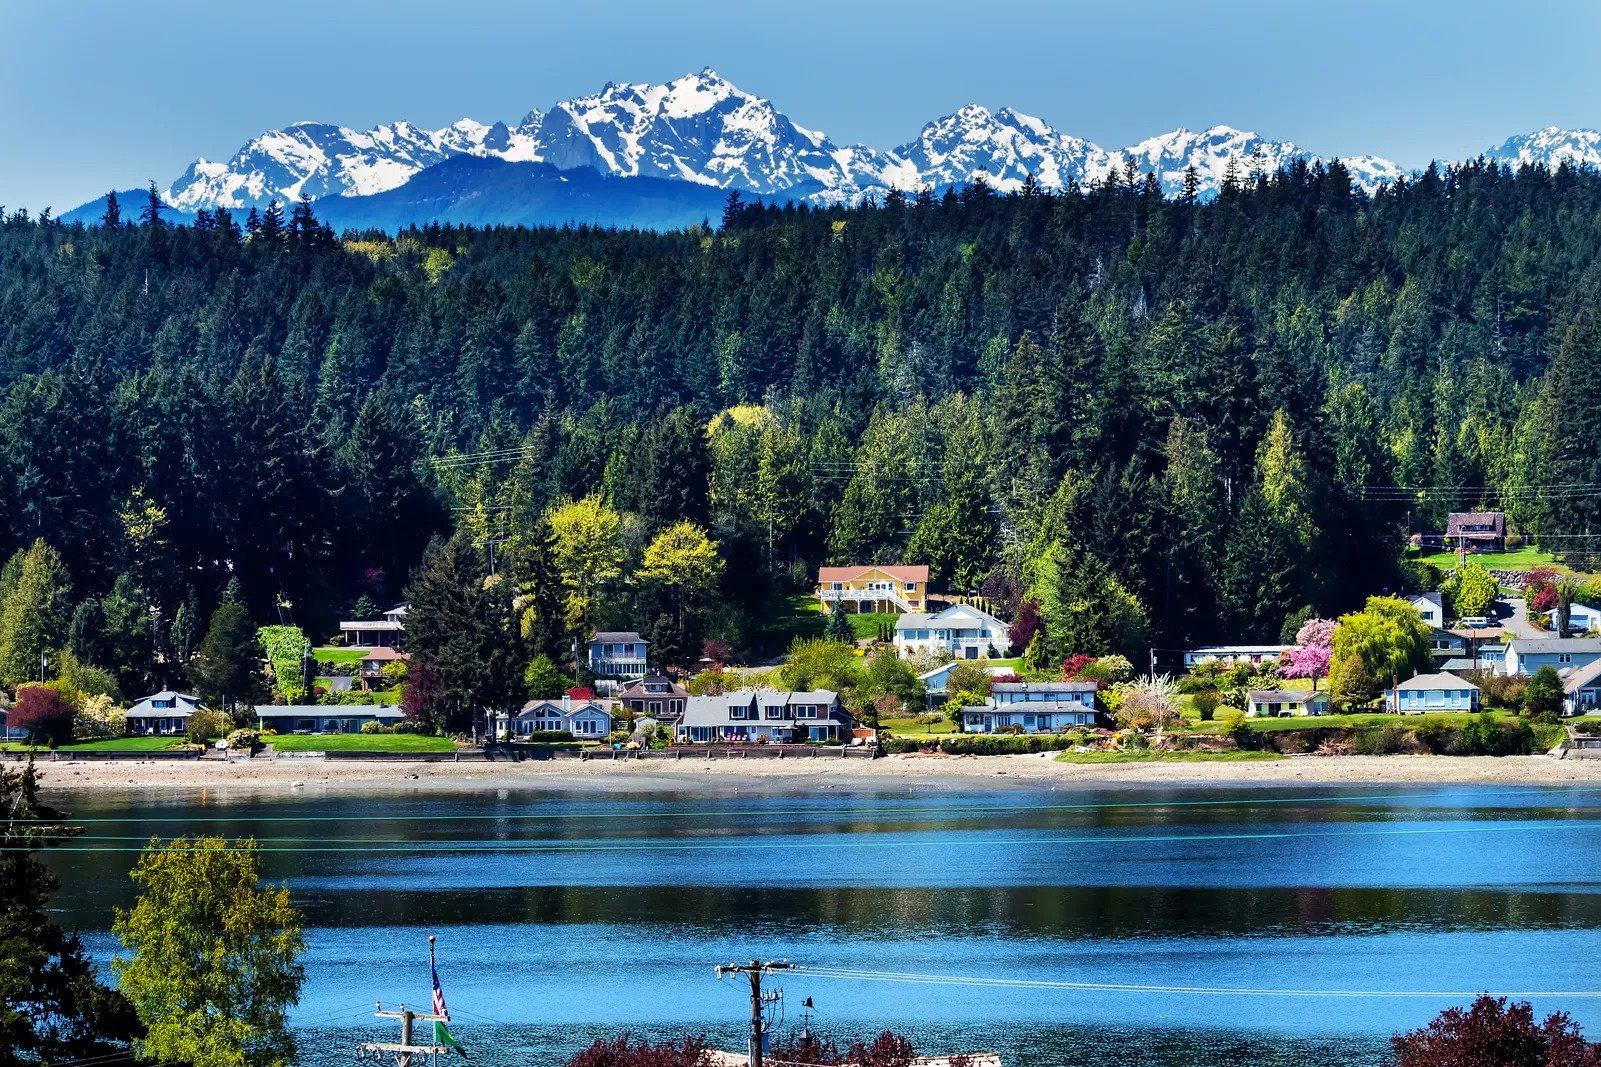 A beach with houses close to its shore in Bainbridge Island